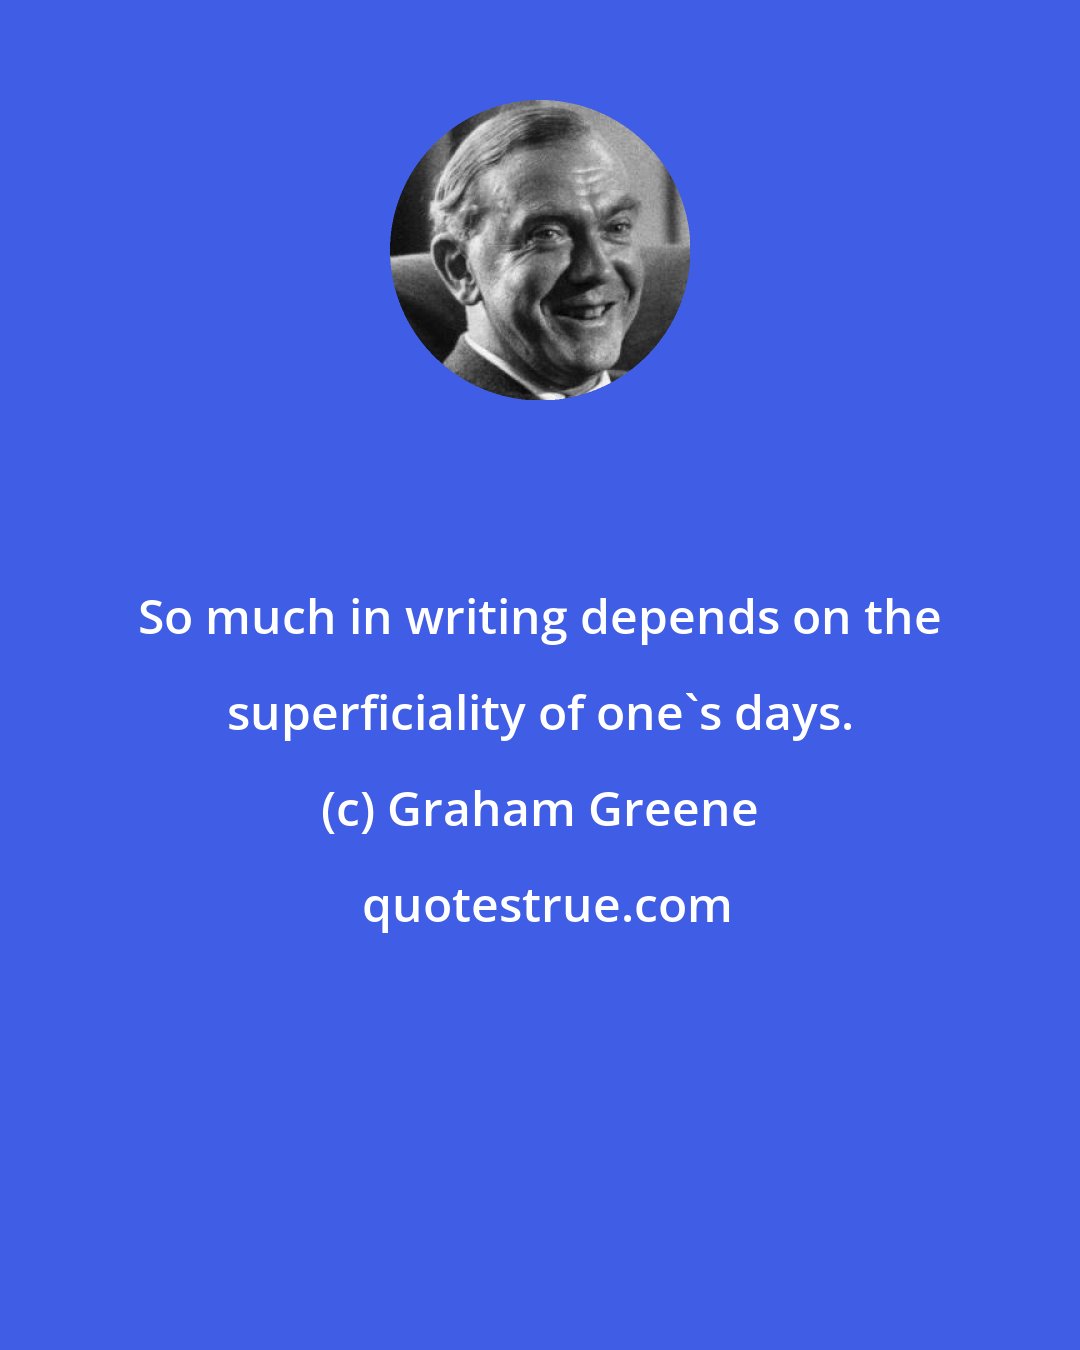 Graham Greene: So much in writing depends on the superficiality of one's days.